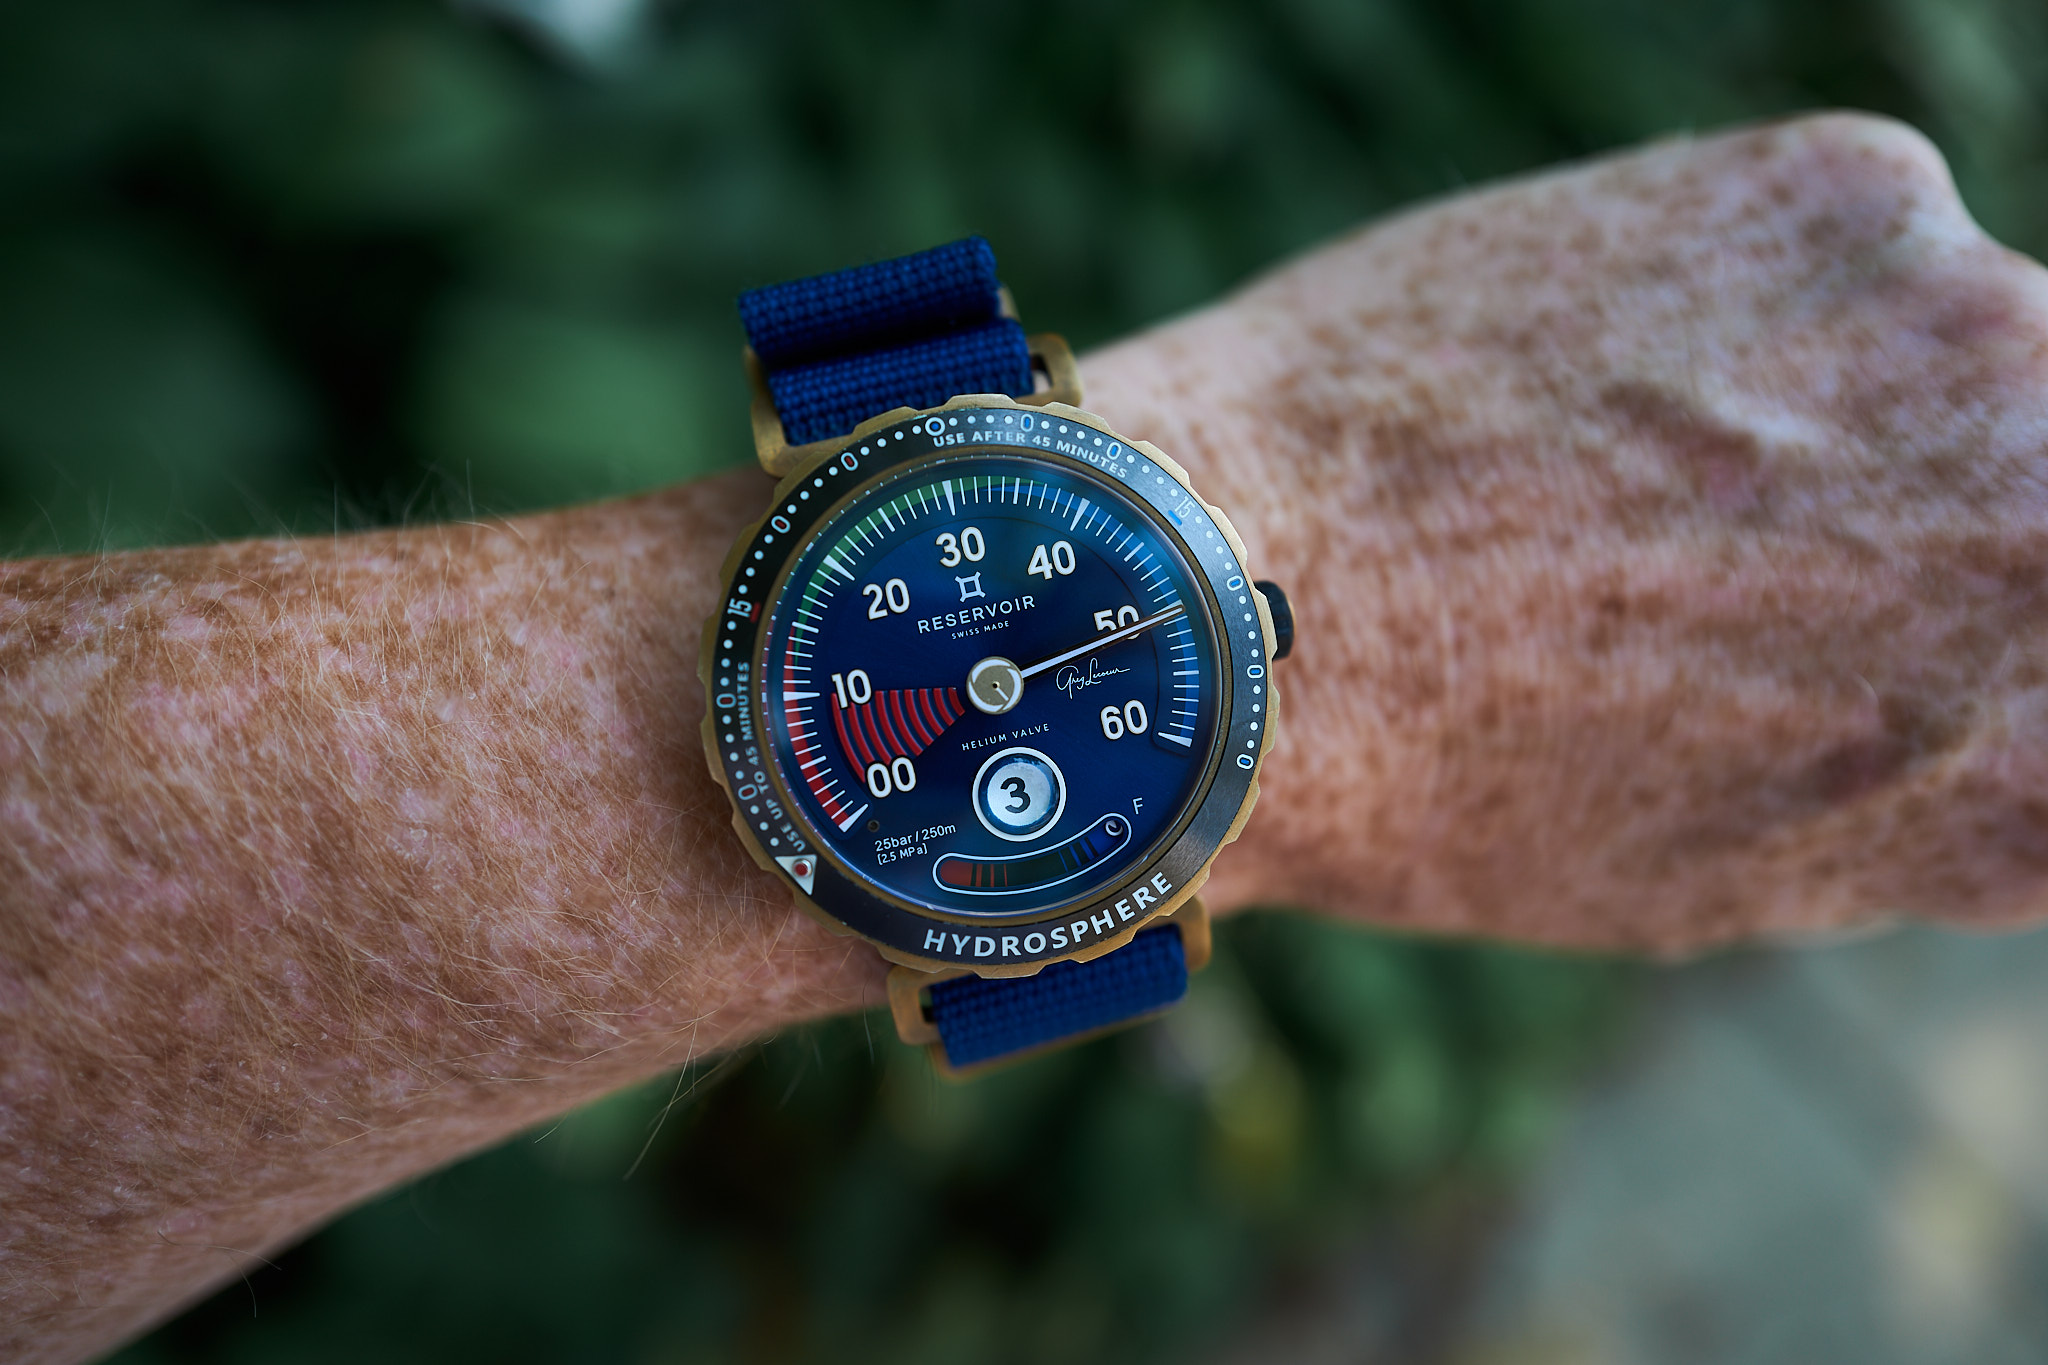 Reservoir Hydrosphere Greg Lecoeur Limited Edition Bronze - in-depth field review dive watch